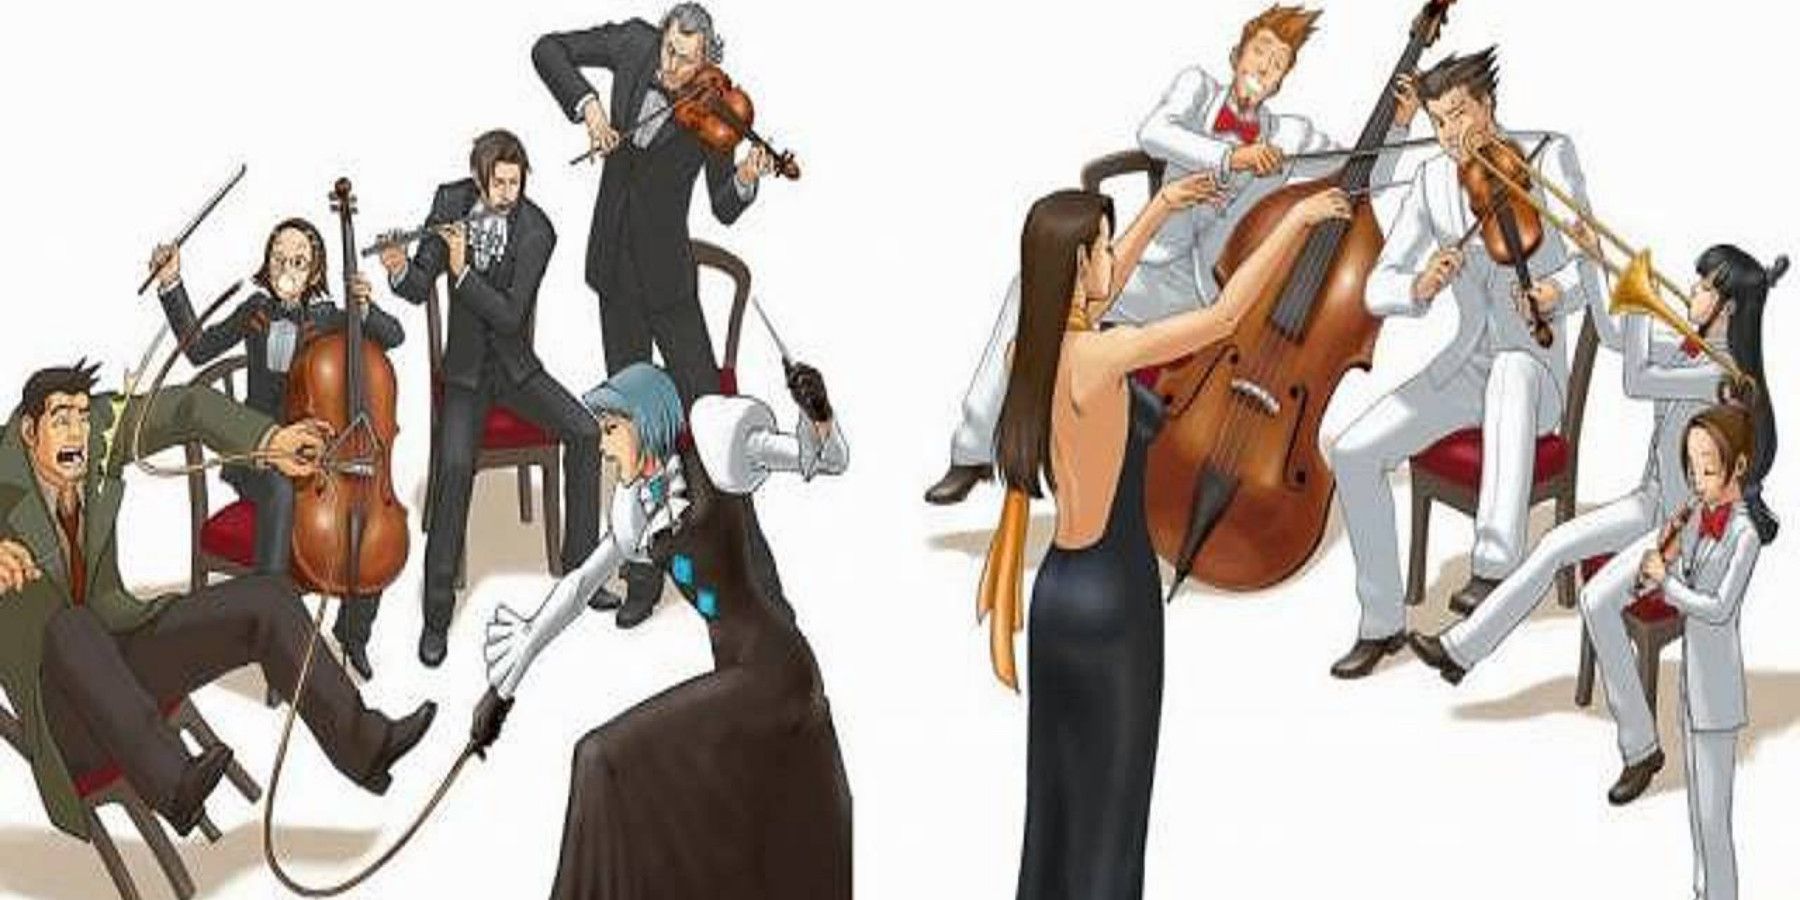 Ace attorney Orchestra